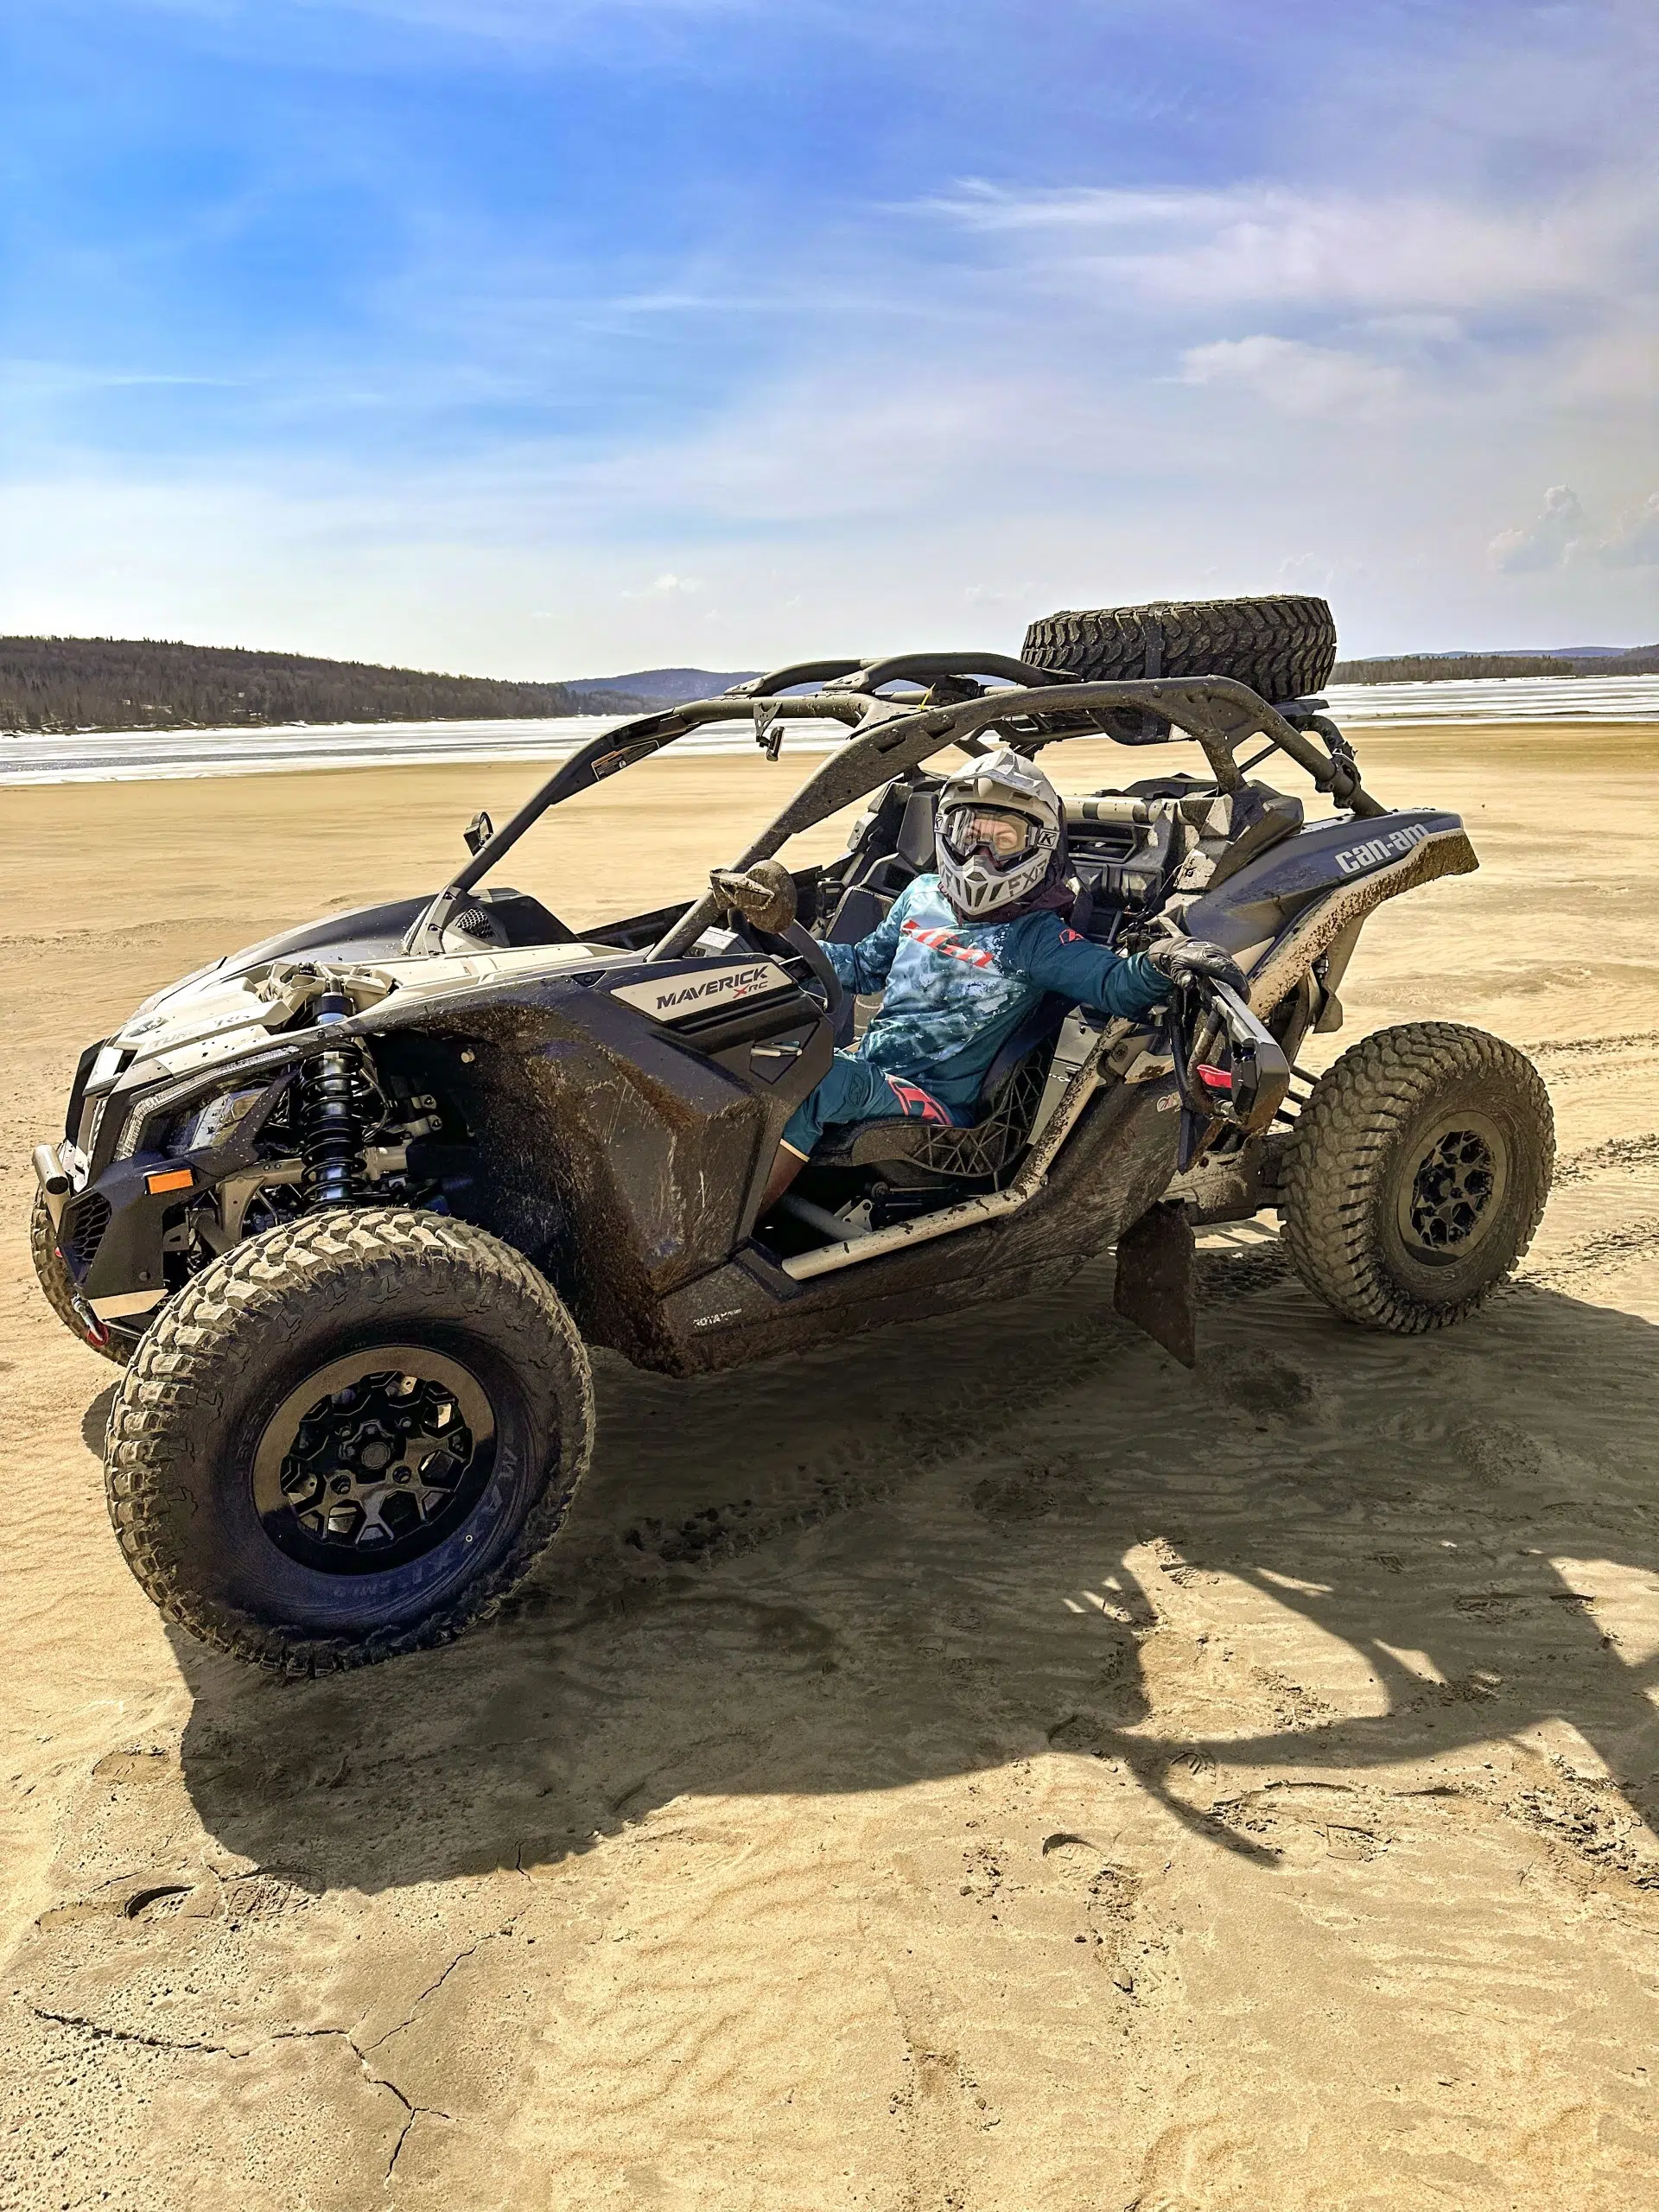 Bianca B. and her Can-Am Maverick X3, XRC, Turbo RR, 2023, developing 200 hp of pure joy in this version. We see that things have evolved since the first Maverick 1000R! photo credit: @bianca.baril